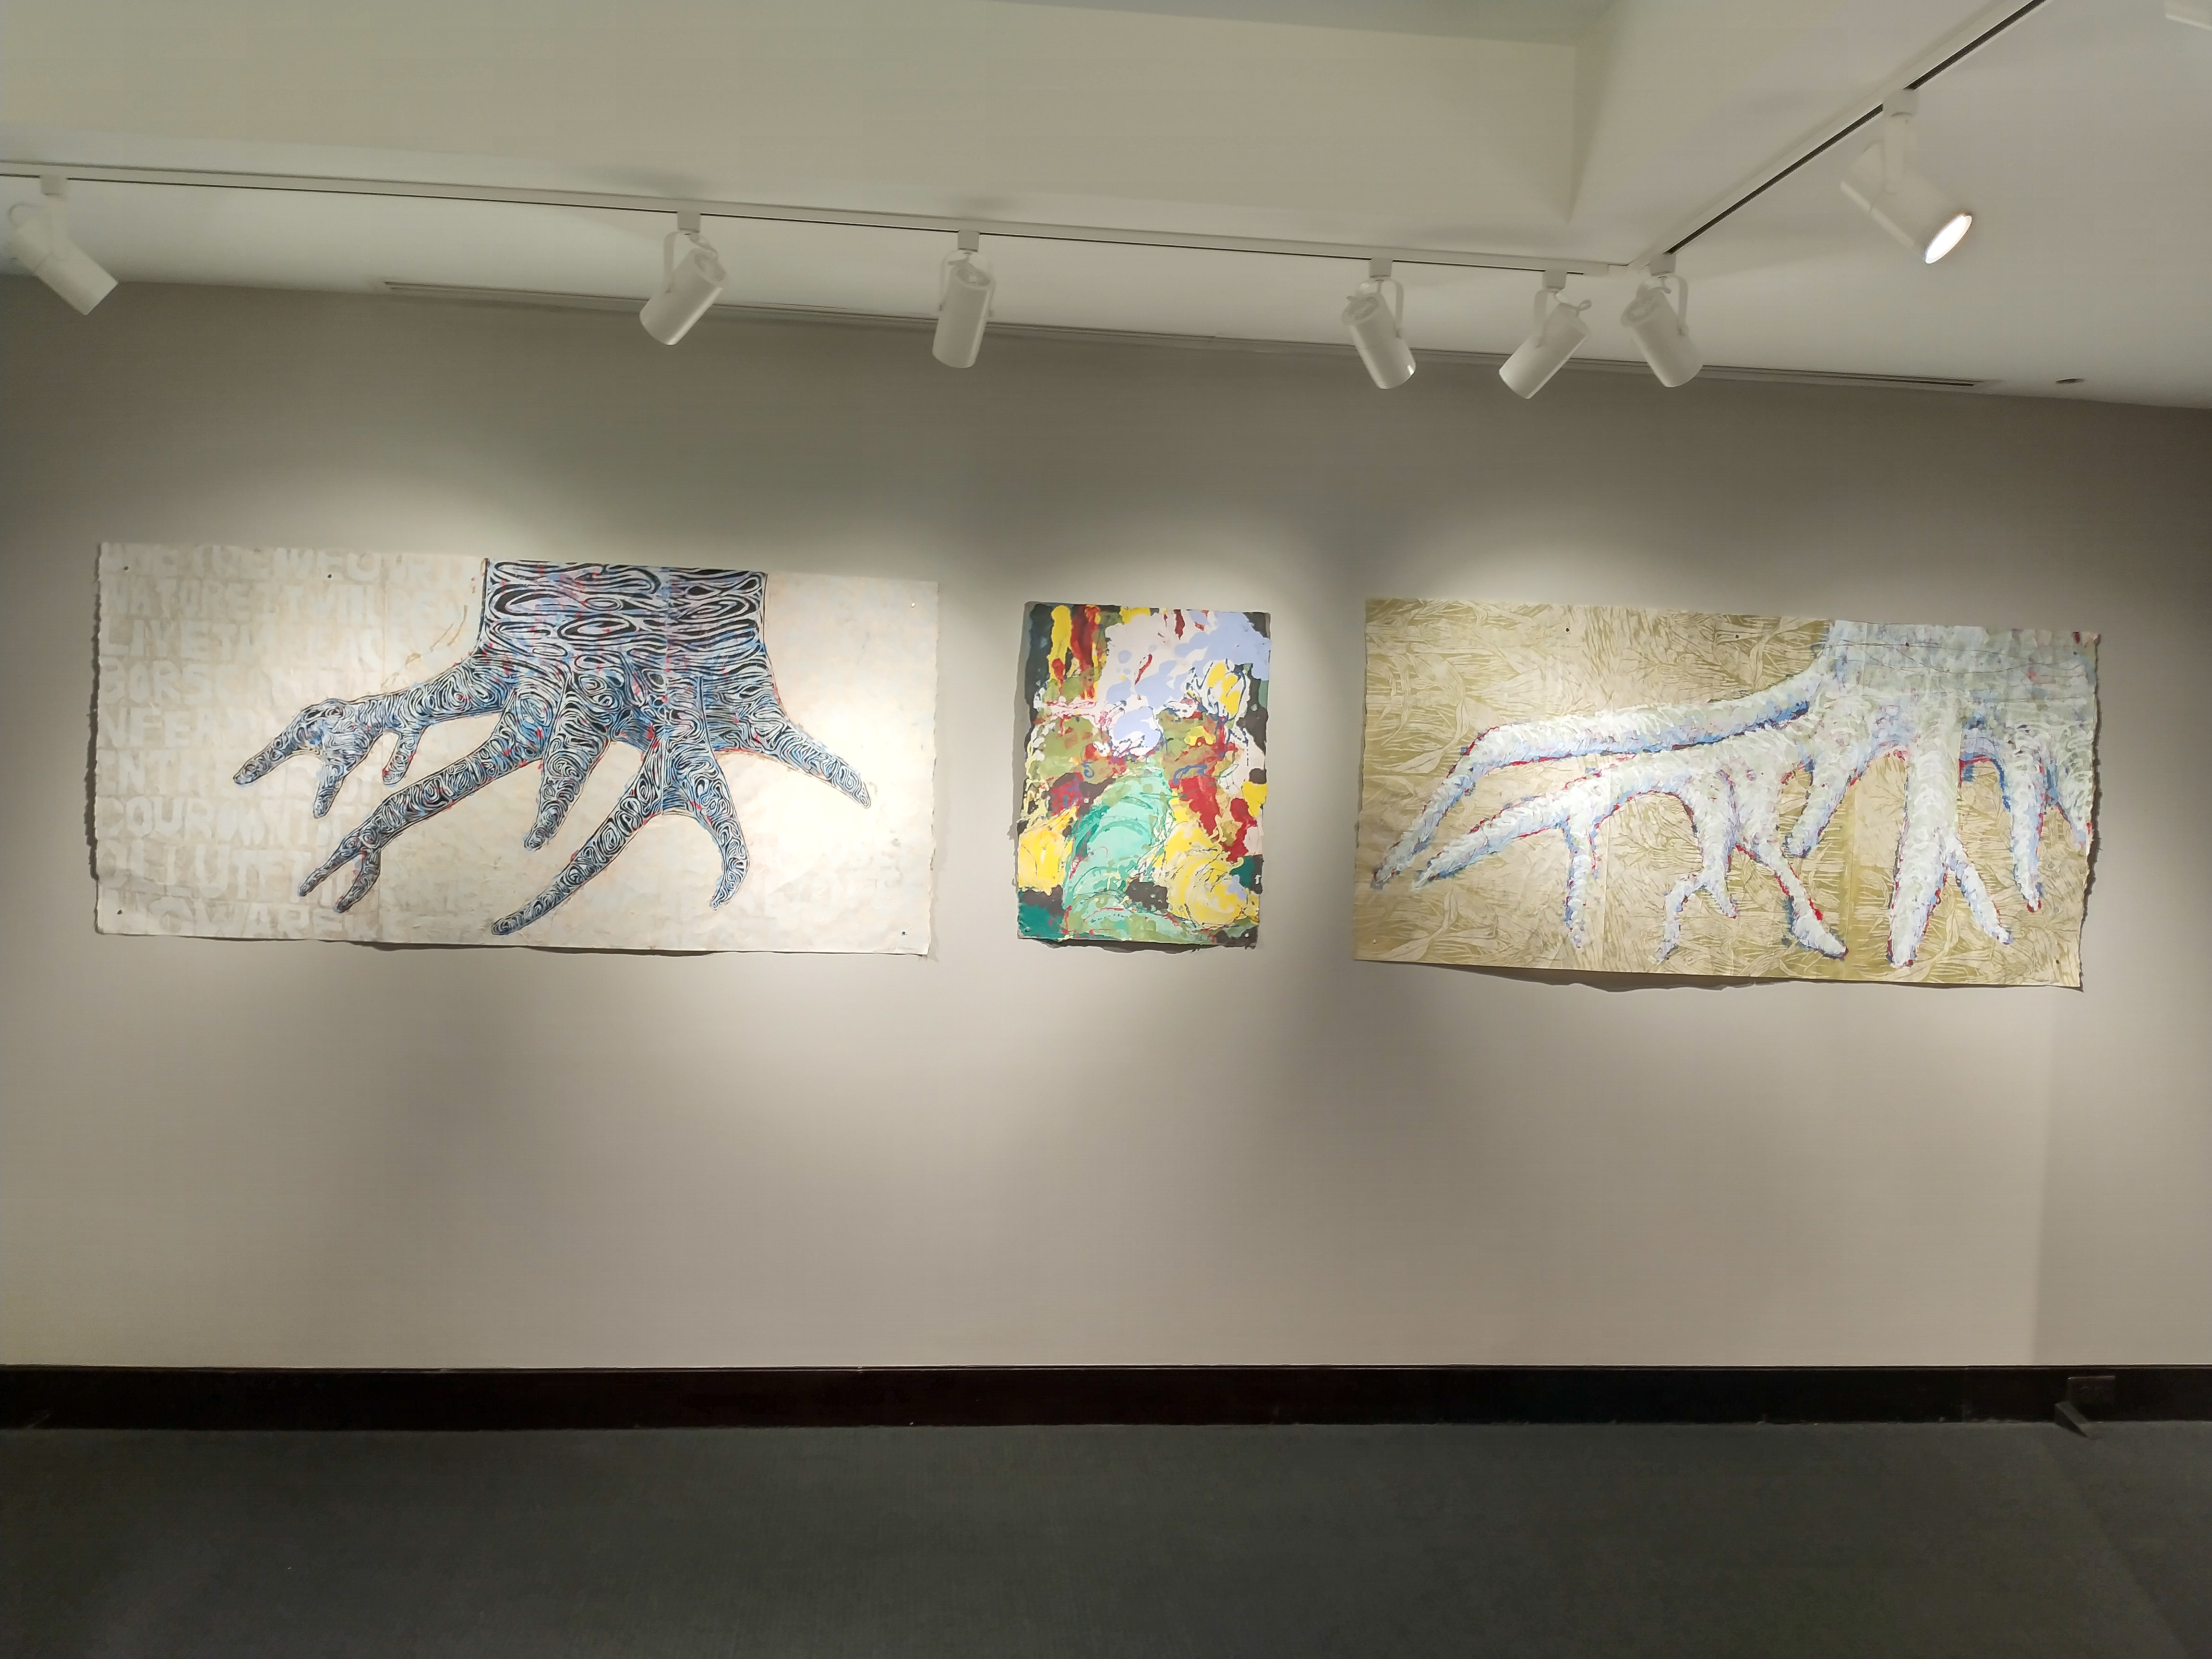 The west wall of the small gallery features two portraits of tree trunks  flanking an abstract piece that are all created by Andrea Peterson. Beech #4 and Beech #2 both combine pulp painting with block prints overtop. Regeneration, the abstract piece has yellow and green shapes that eco the forms of the lower trunk seen in the surrounding work but instead of traveling upwards into a trunk form the upper part of the composition is a swirl of blue, white and yellow.